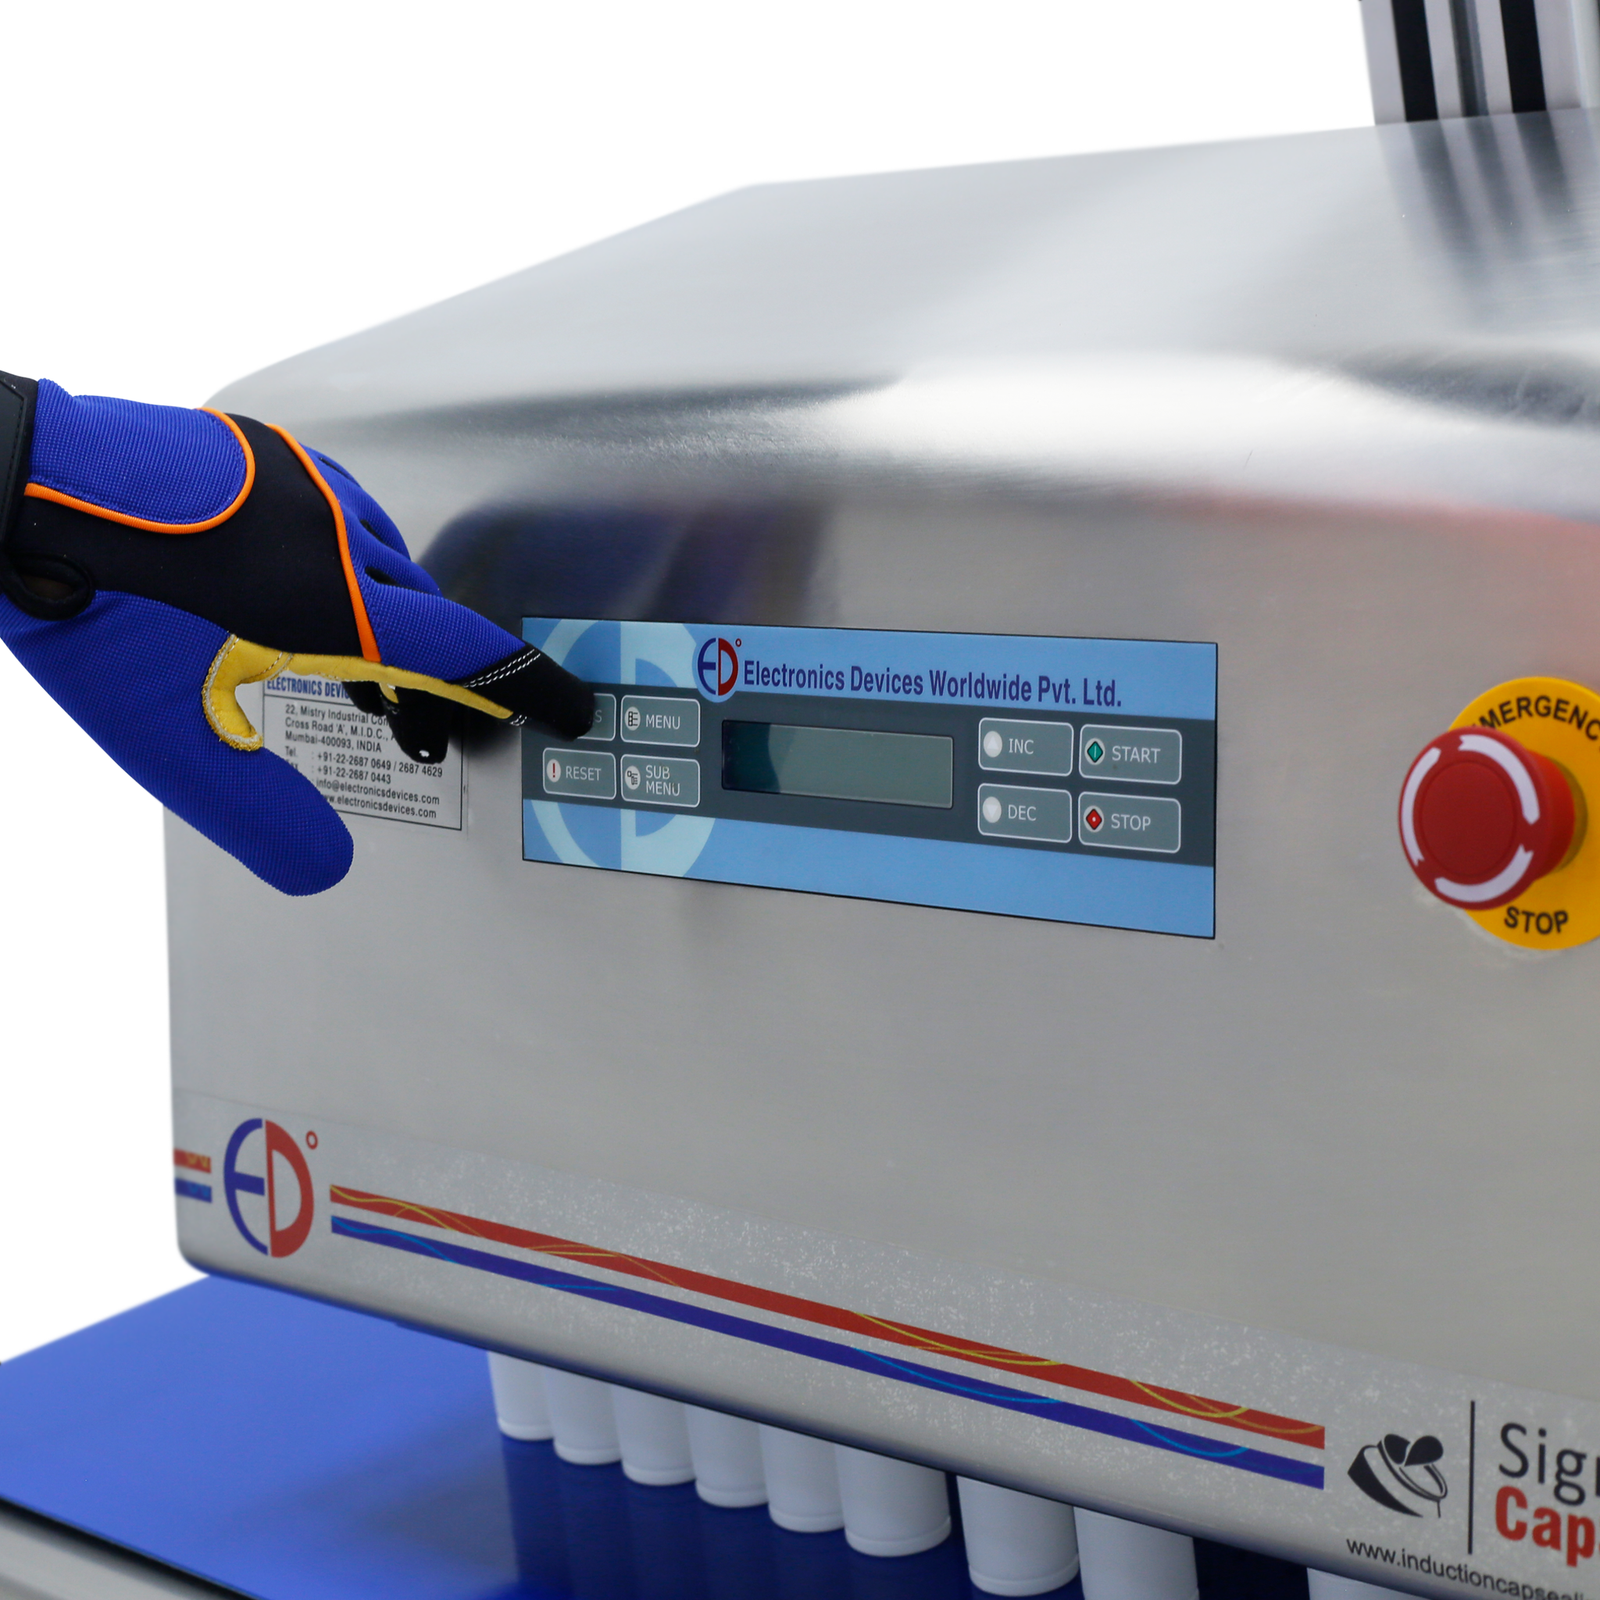 Operator wearing a blue glove can be seen pressing a button on the control panel of a SIGMA induction sealer machine.